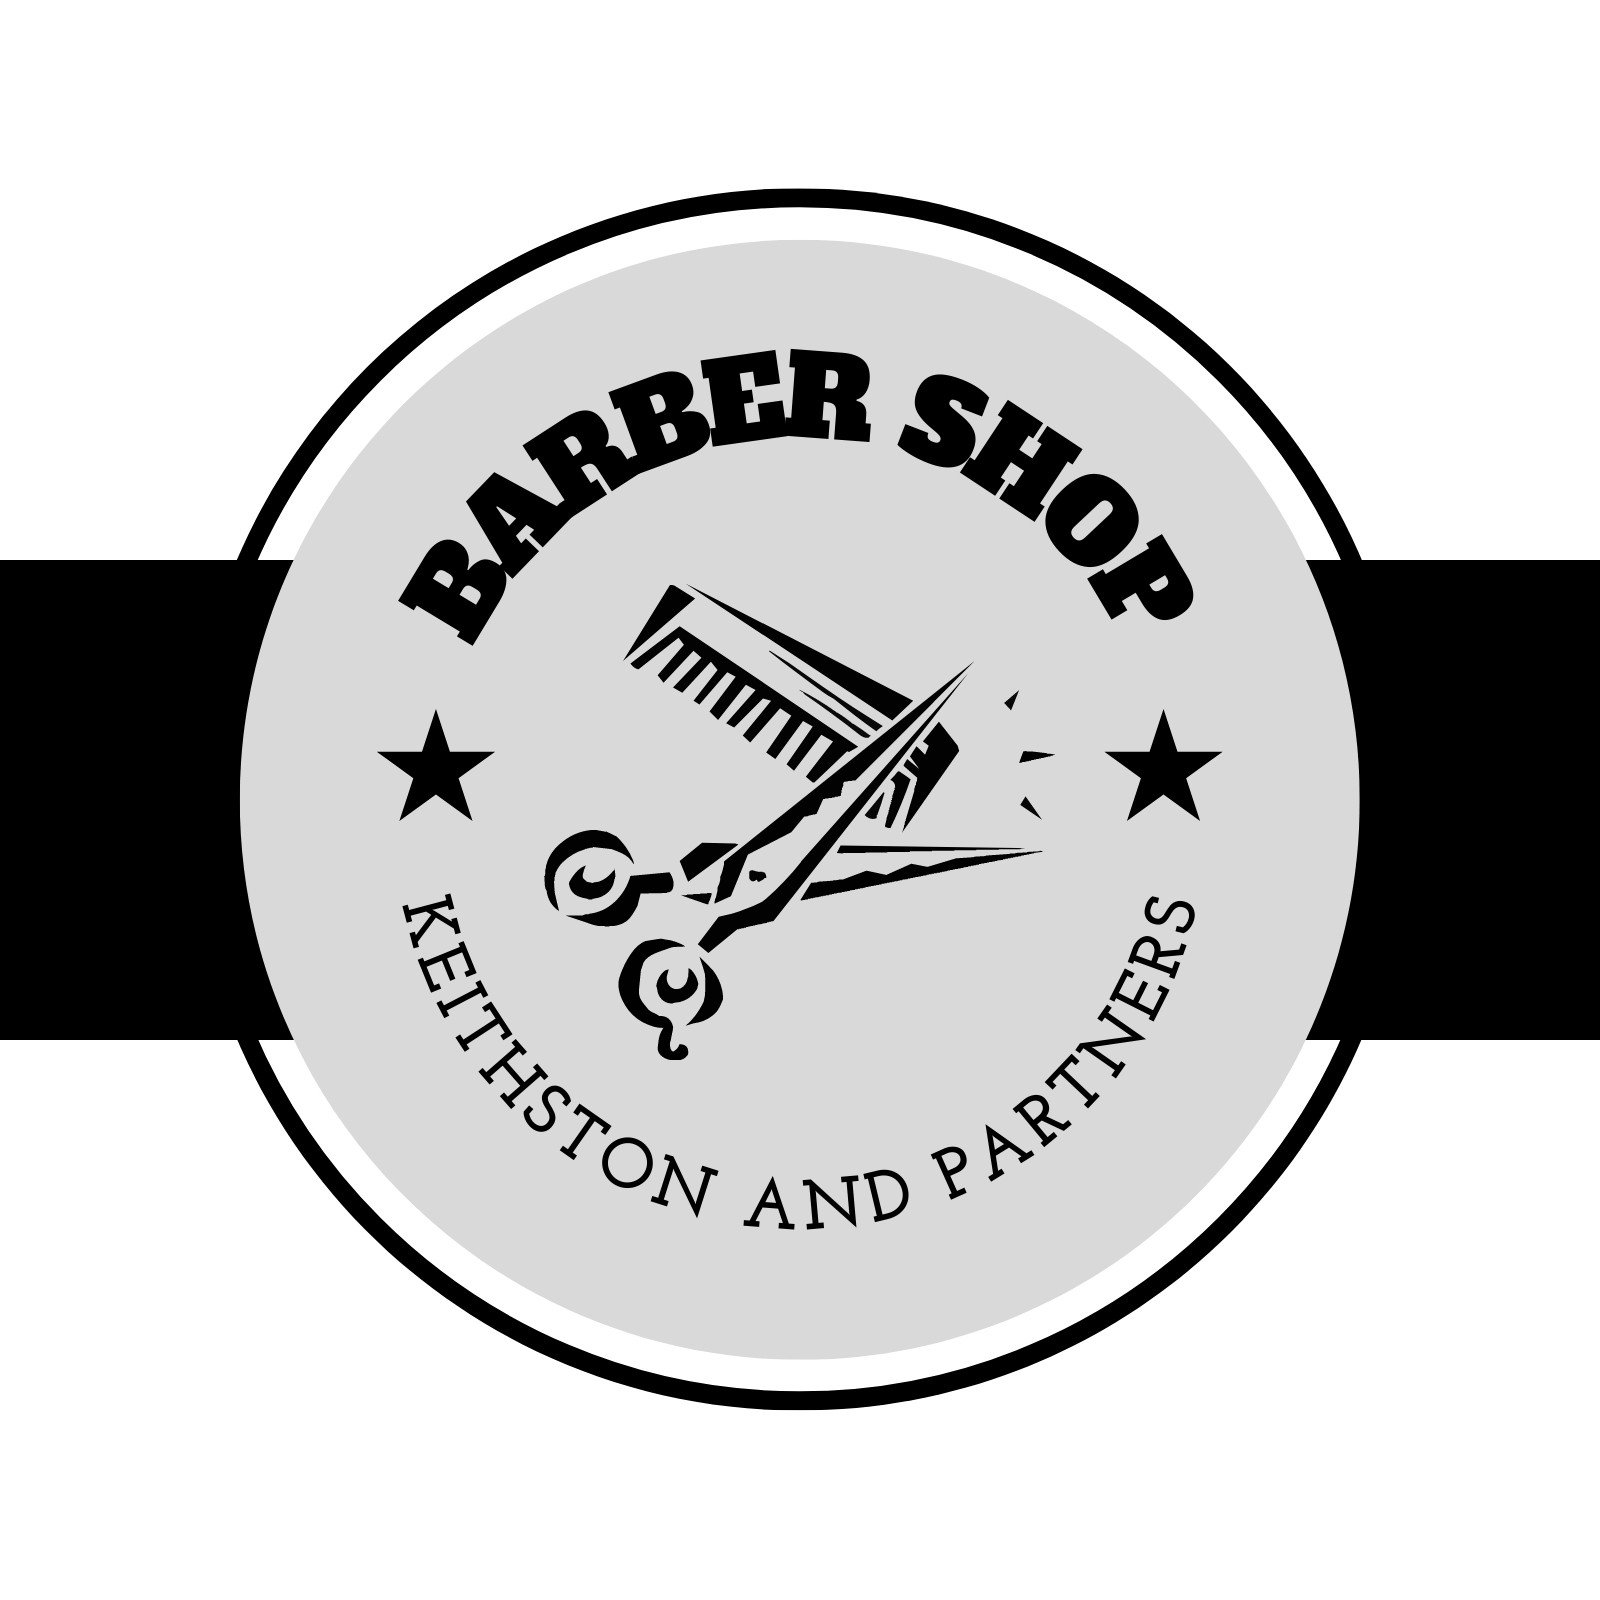 Looking for a logo to represent my barbershop i'm opening., Logo design  contest